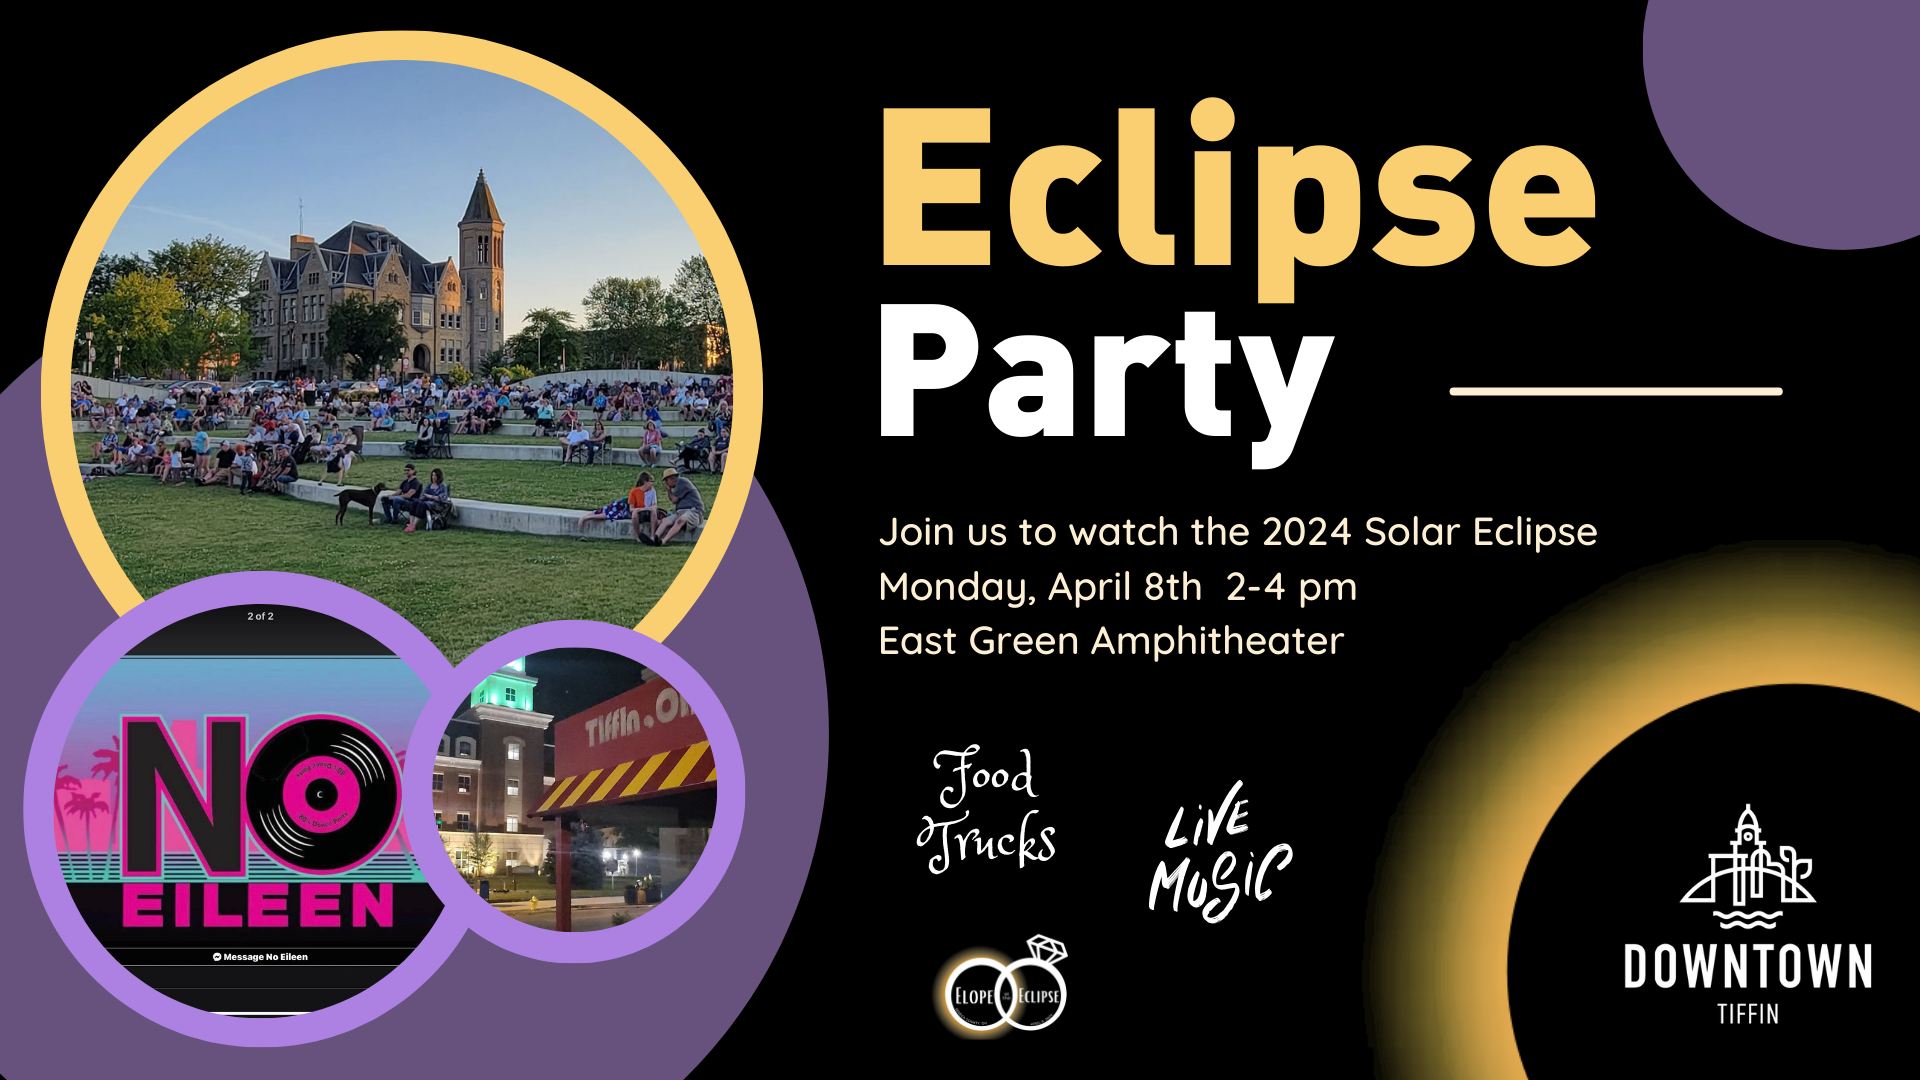 Downtown Tiffin - Eclipse Party